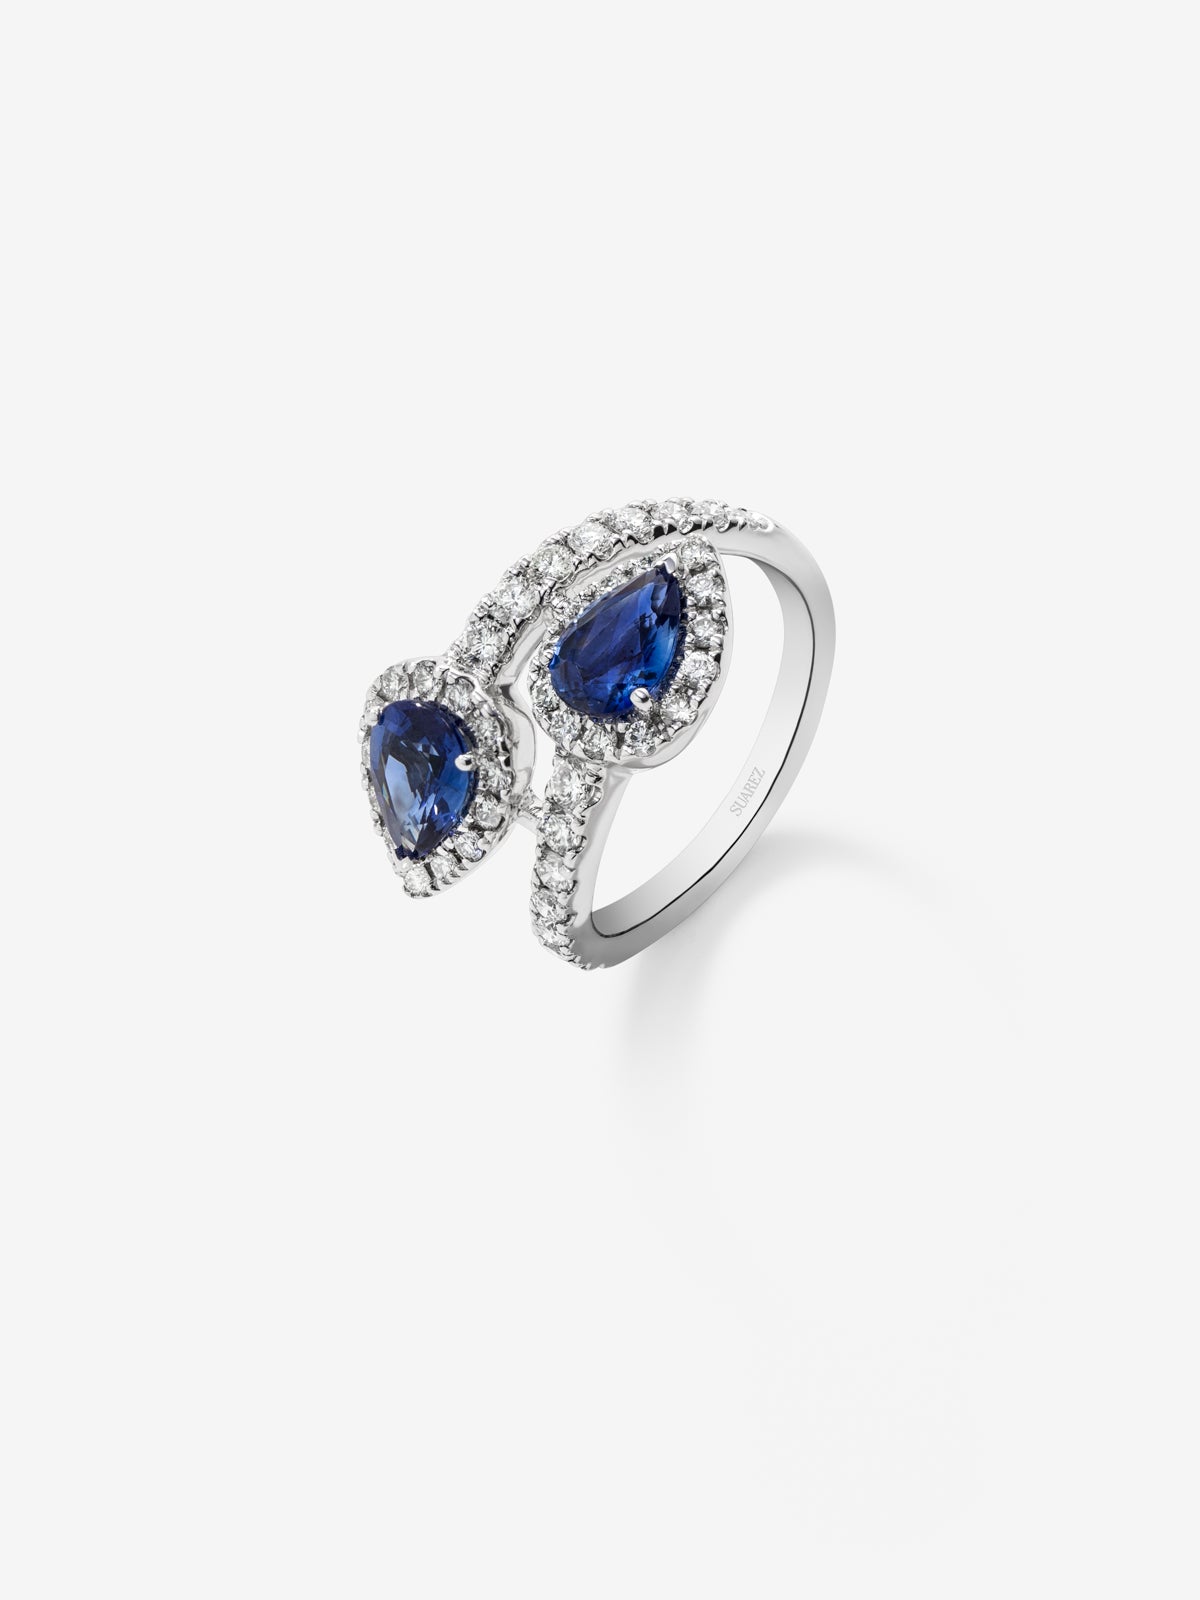 You and me ring in 18K white gold with 2 pear-cut blue sapphires with a total of 1.4 cts and 44 brilliant-cut diamonds with a total of 0.77 cts